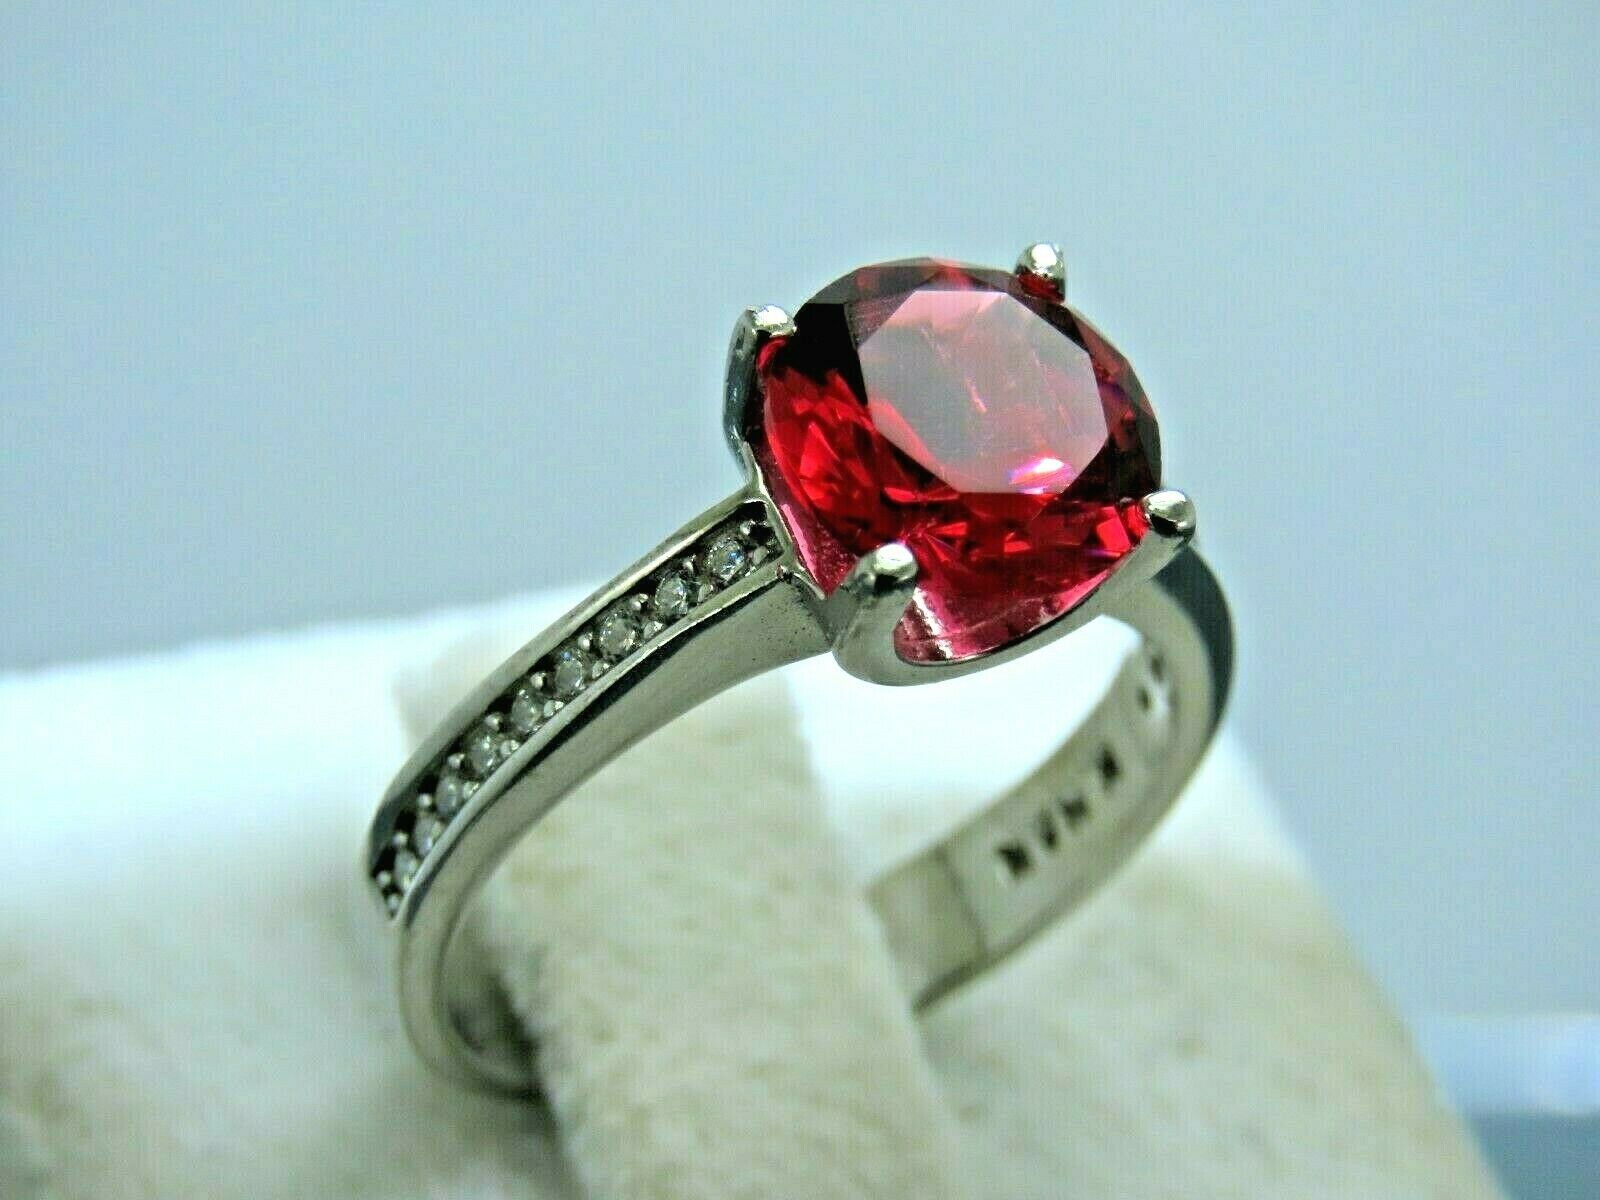 Turkish Sterling Silver Rings Online for Girls & Womens in